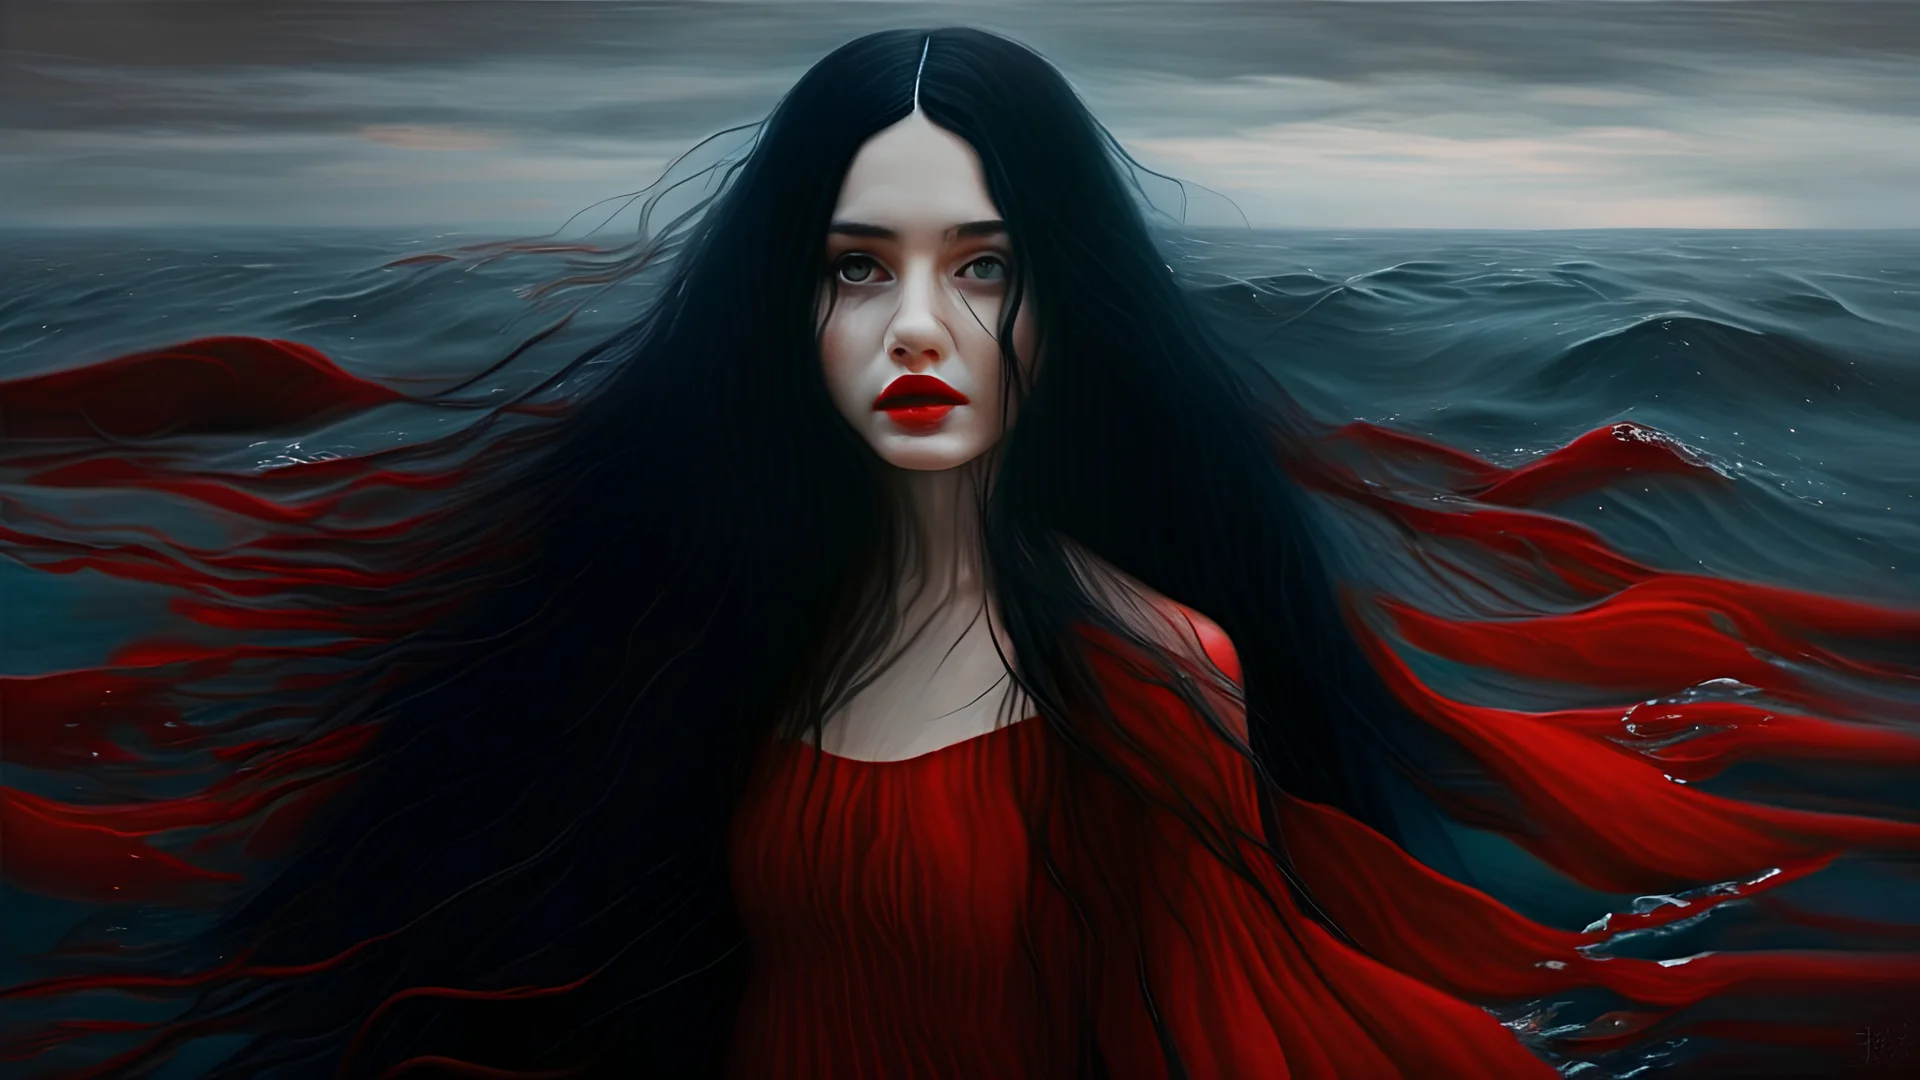 A beautiful girl in a red dress, long black hair and black eyes lives in the middle of the ocean